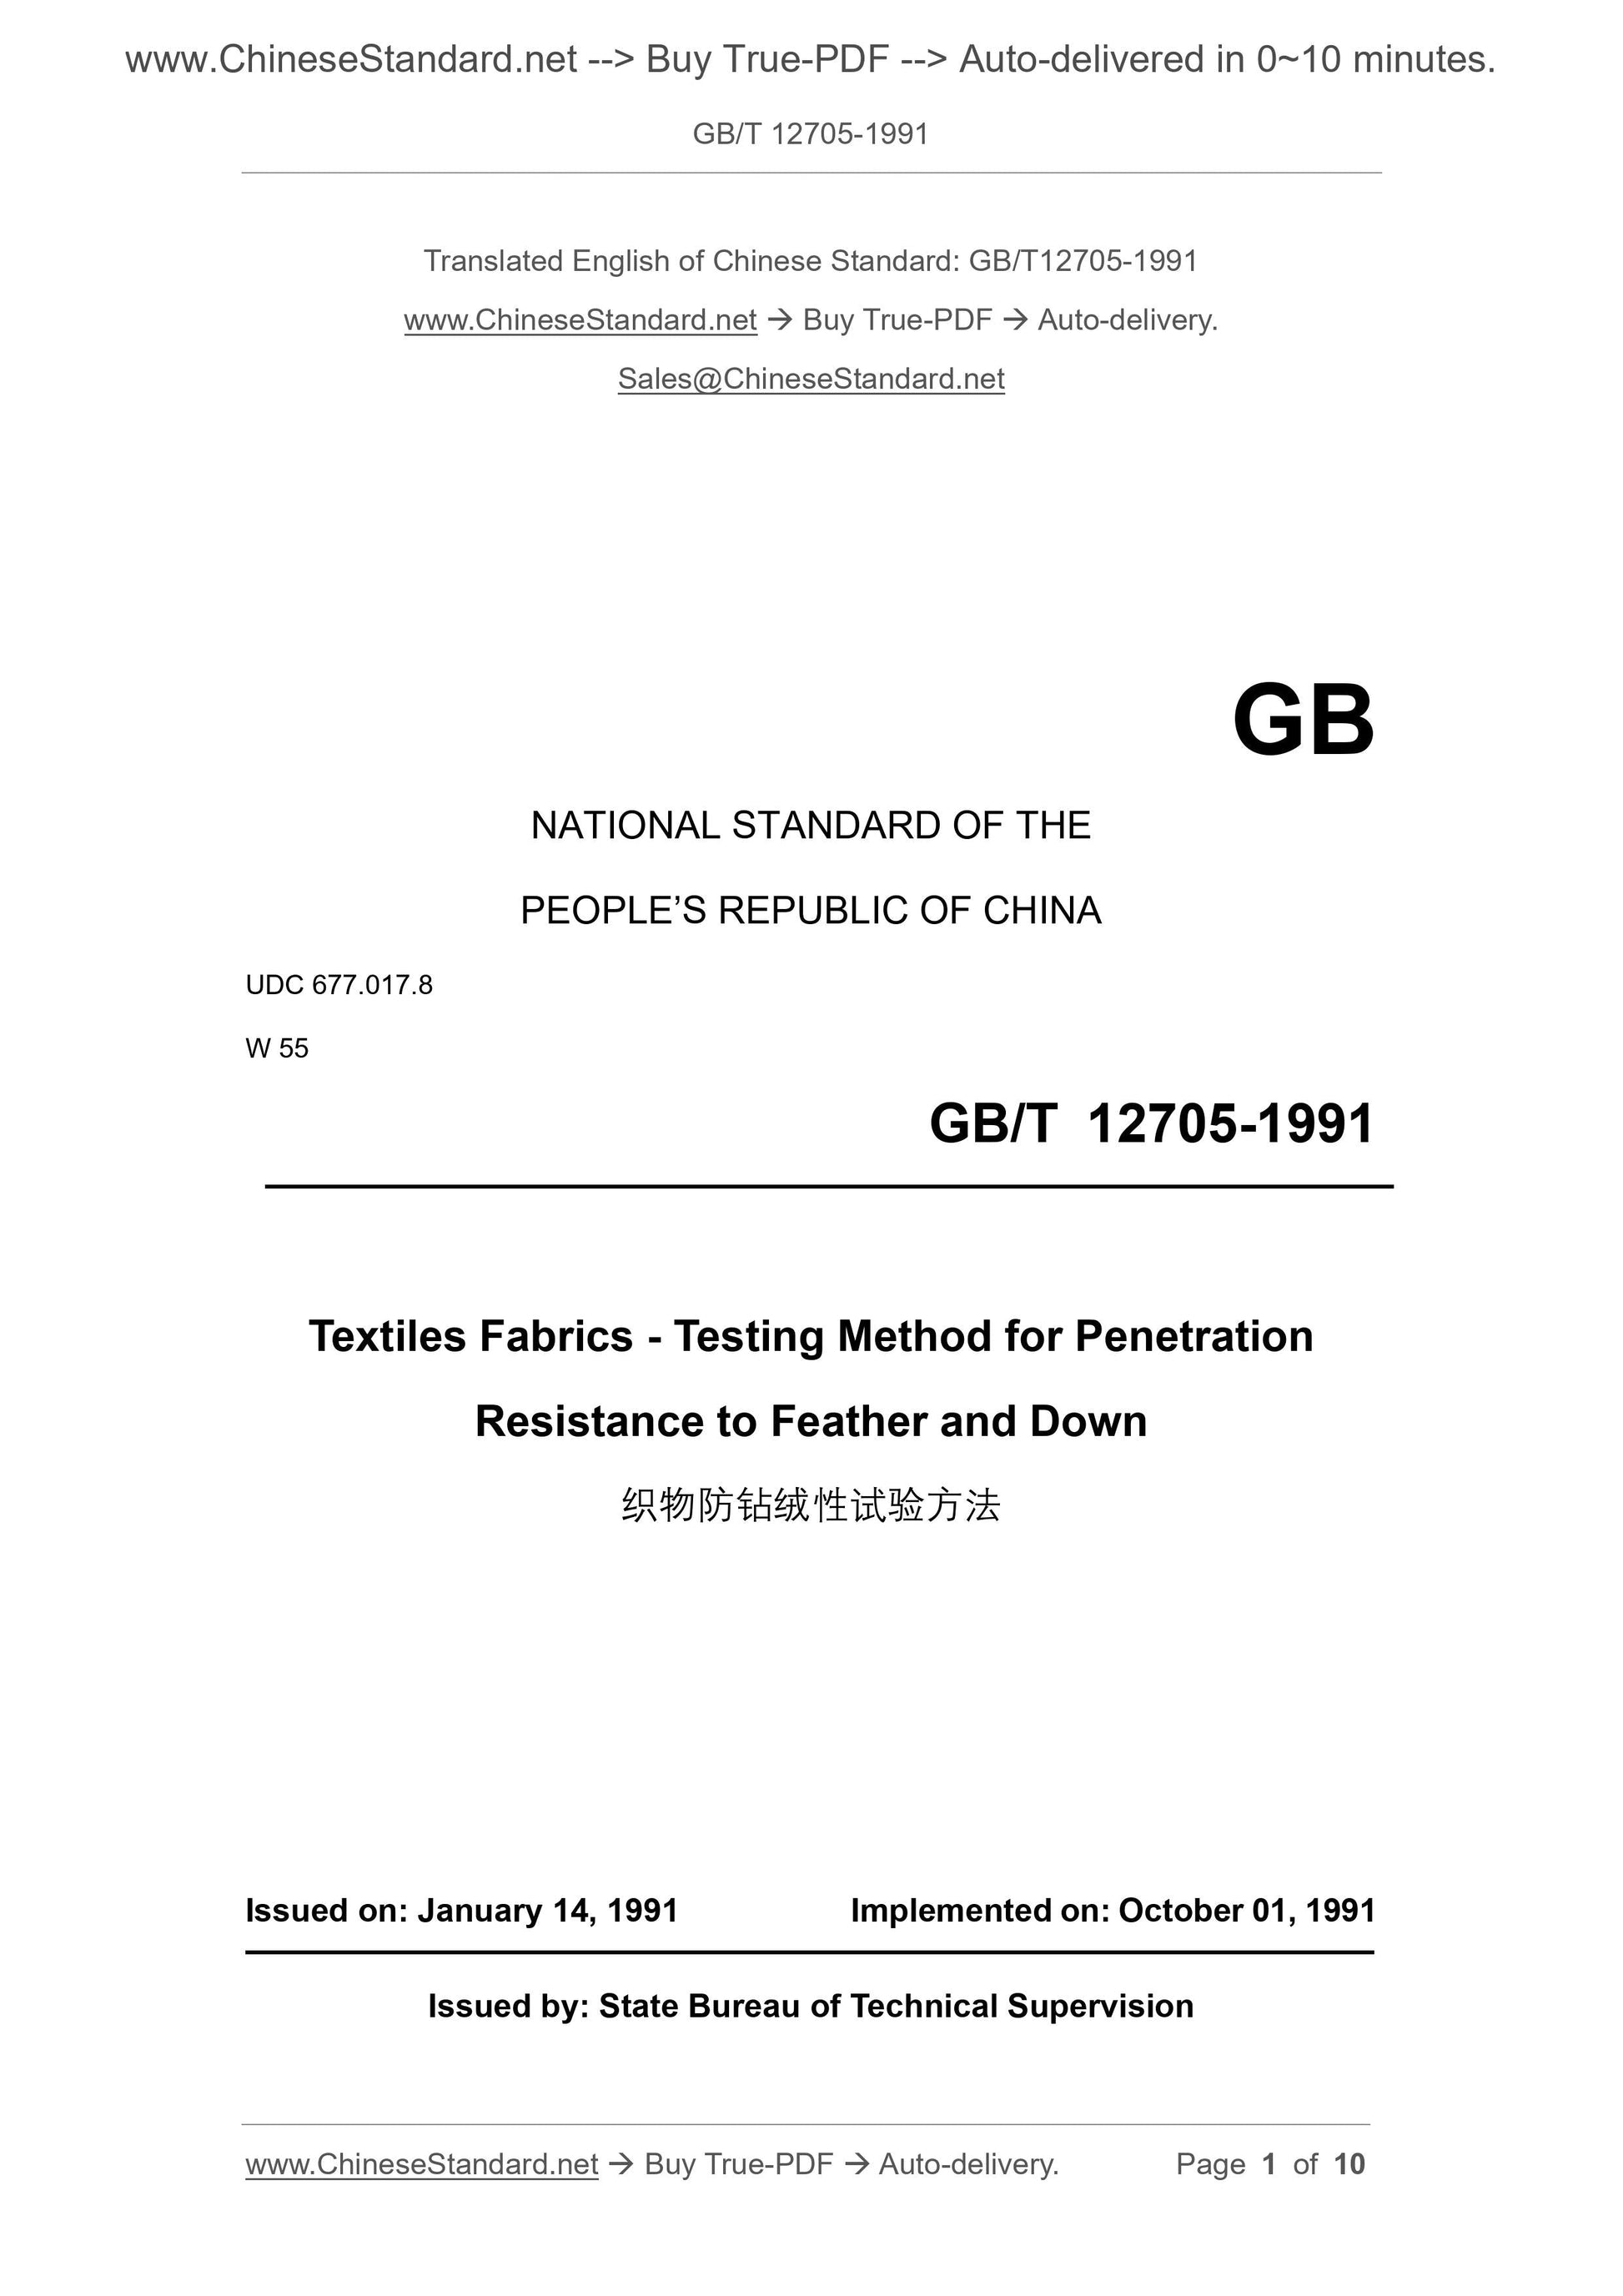 GB/T 12705-1991 Page 1